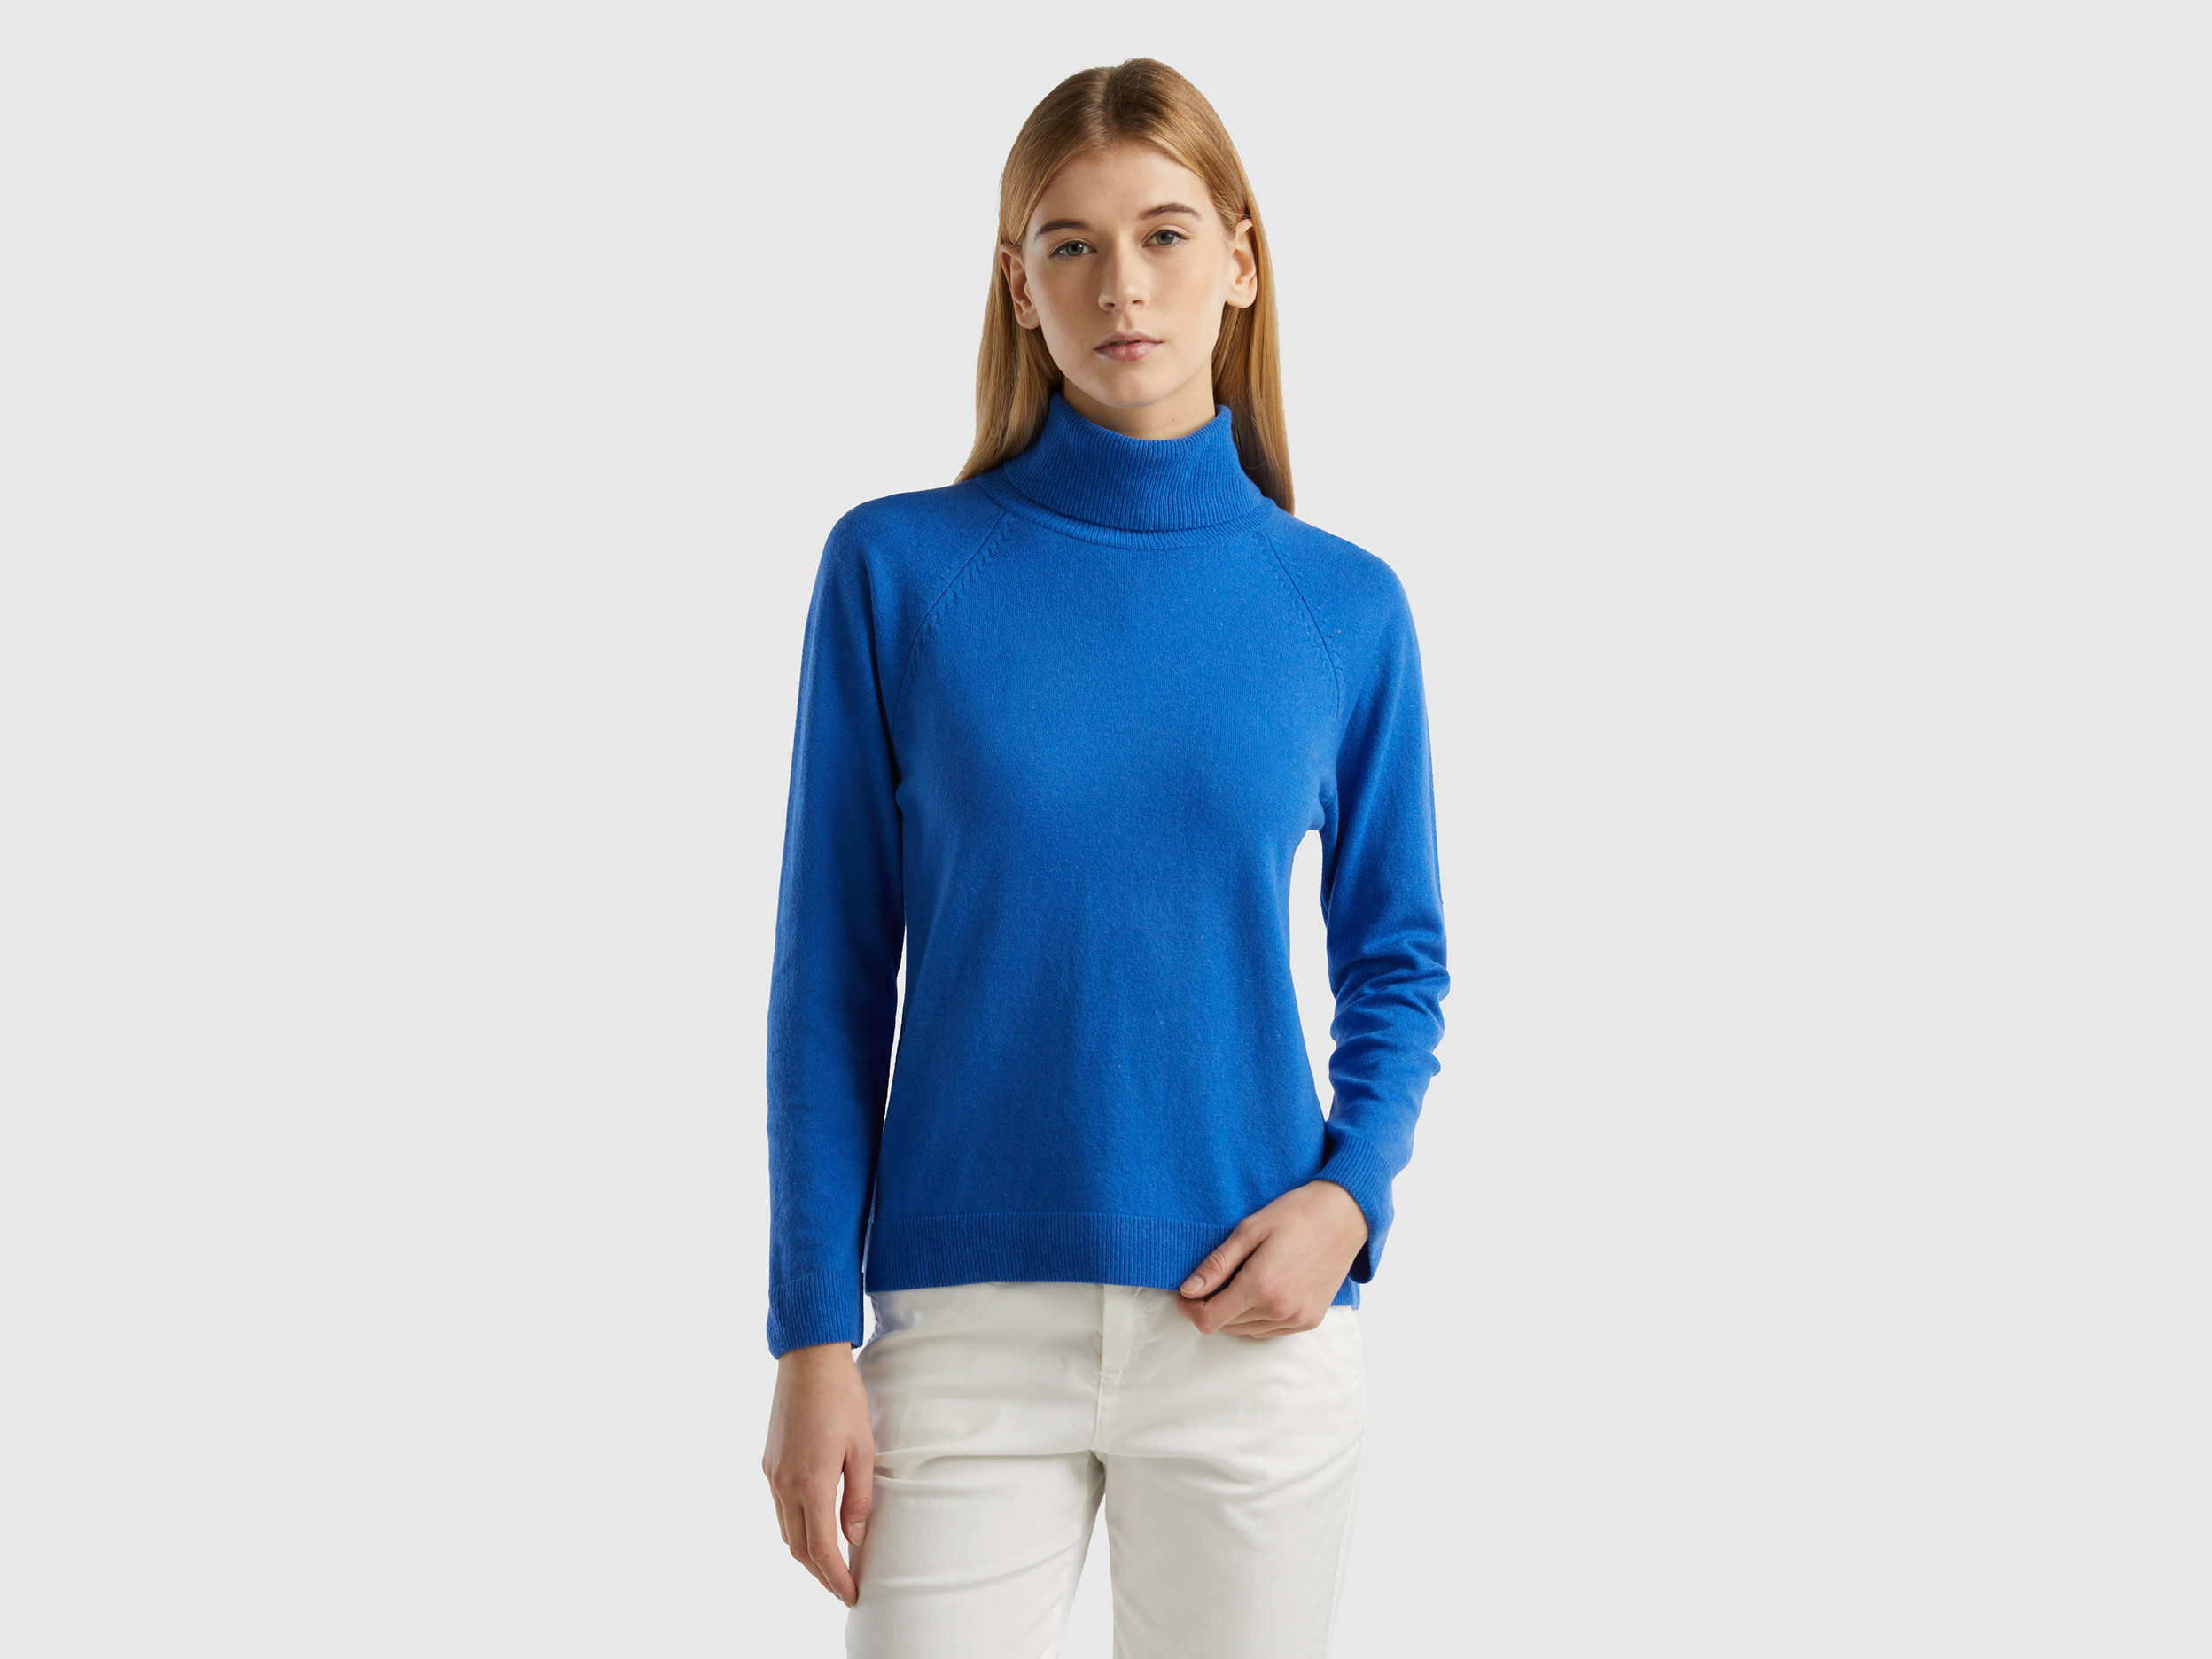 Benetton, Blue Turtleneck Sweater In Cashmere And Wool Blend, size M, Blue, Women